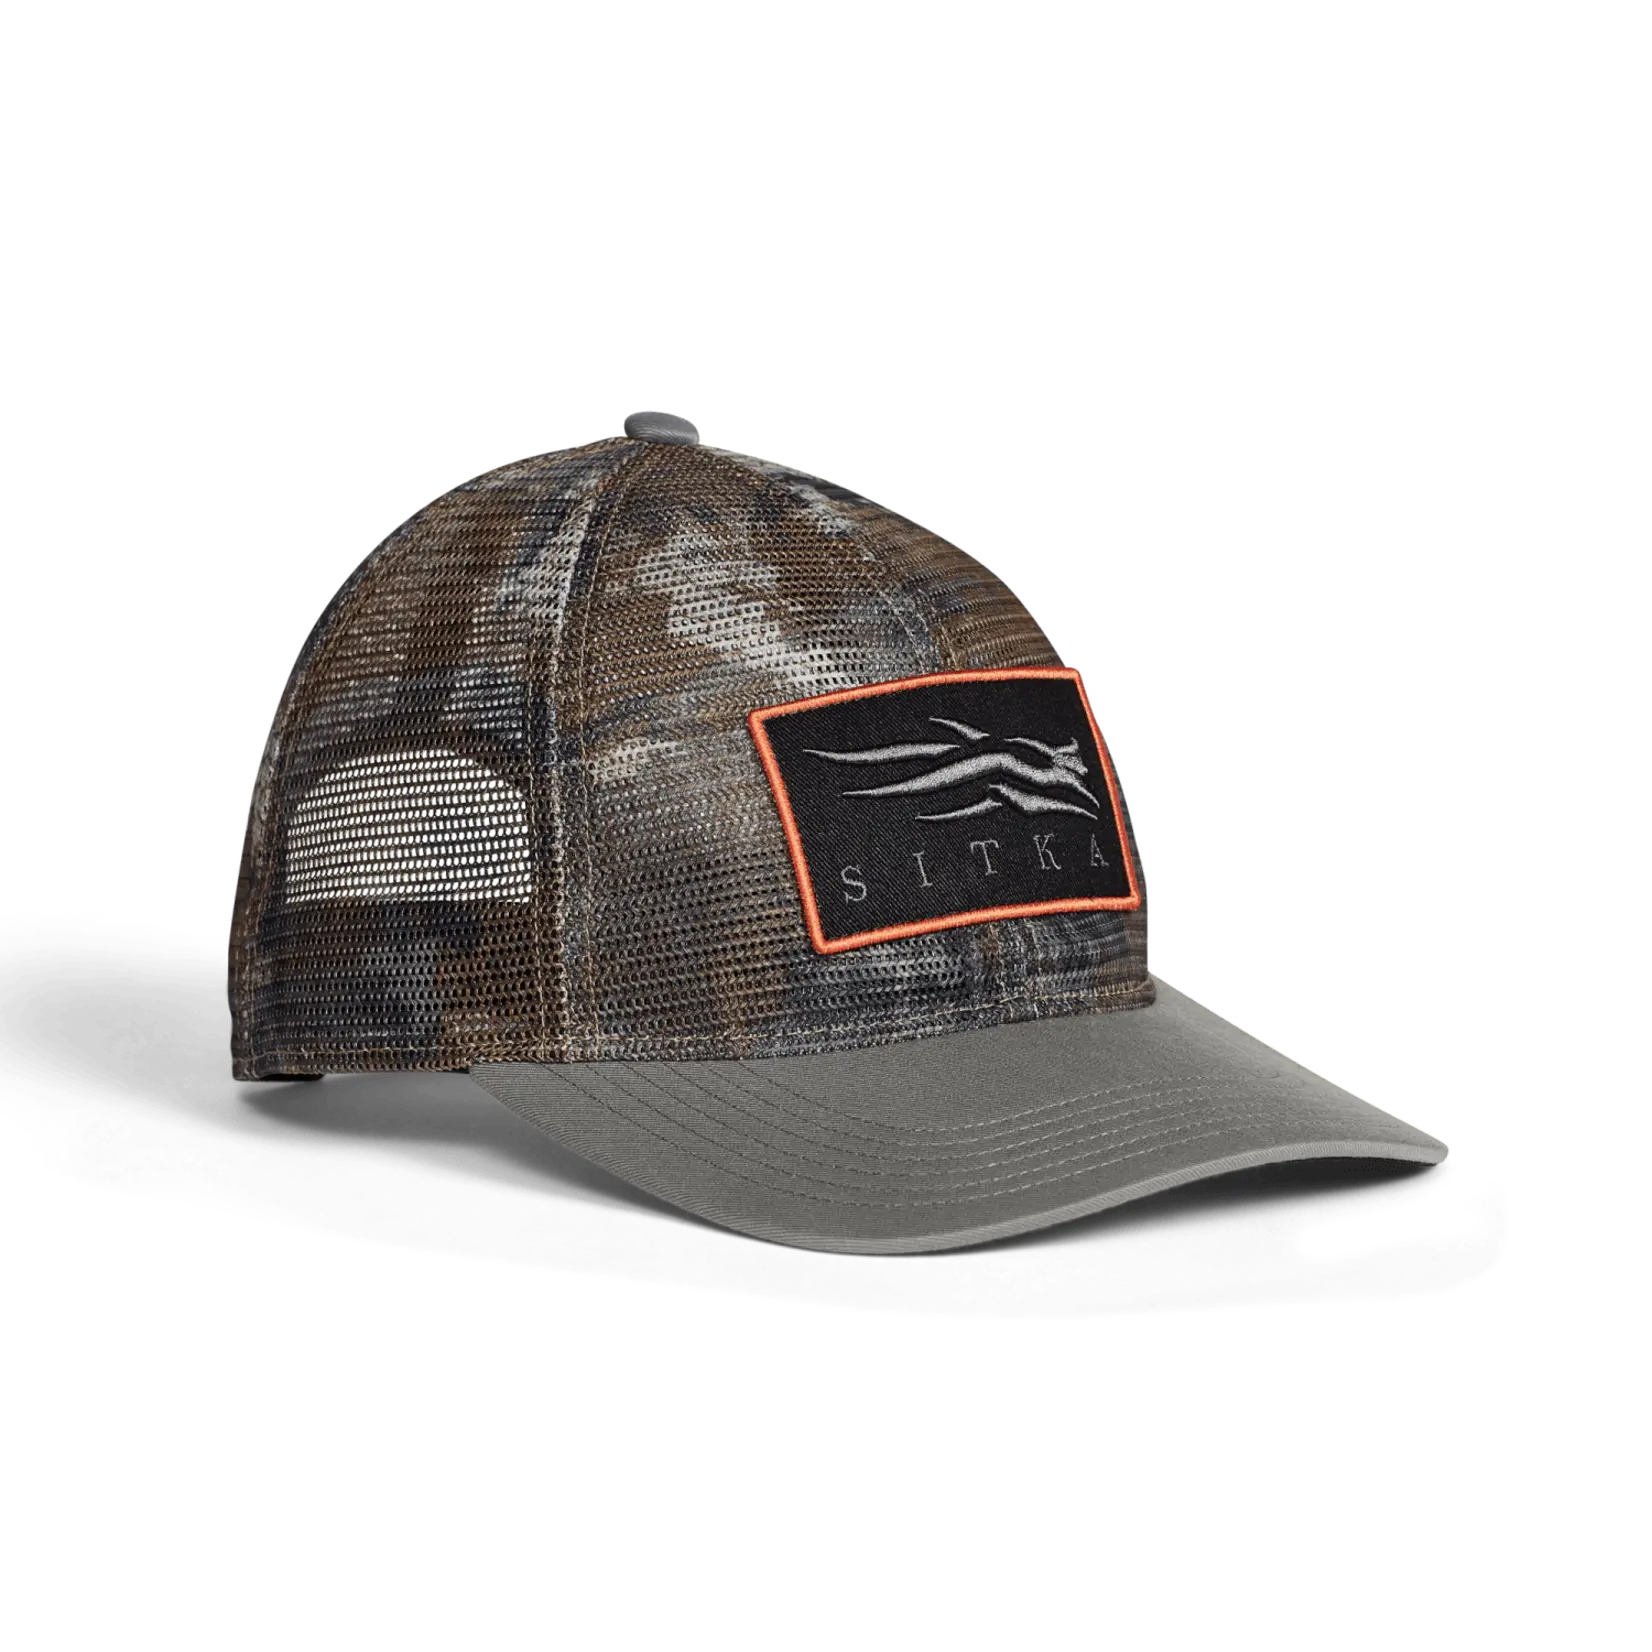 Sitka Sitka Icon Optifade Mesh Mid Pro Trucker One Size Fits All